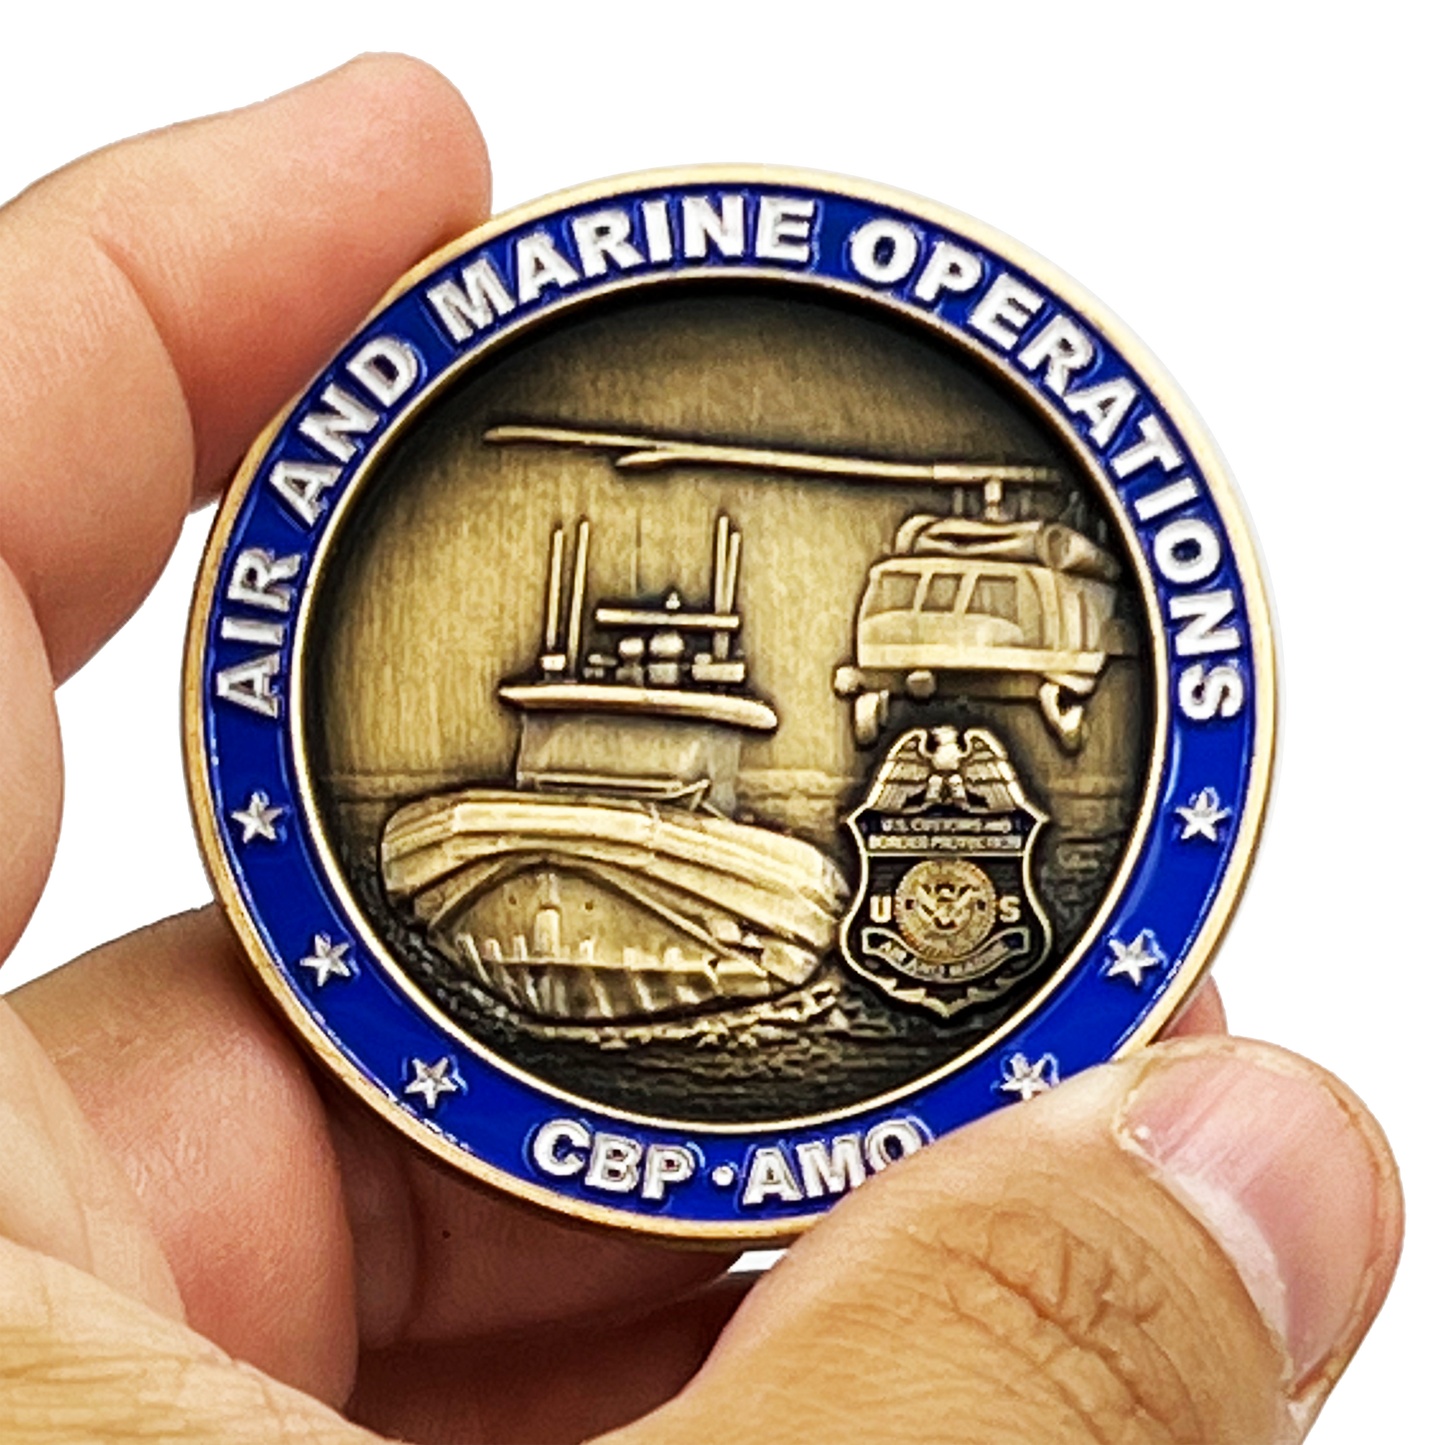 EL11-017 CBP Air and Marine Ops AMO Operations challenge coin Air Interdiction Agent Marine Agent